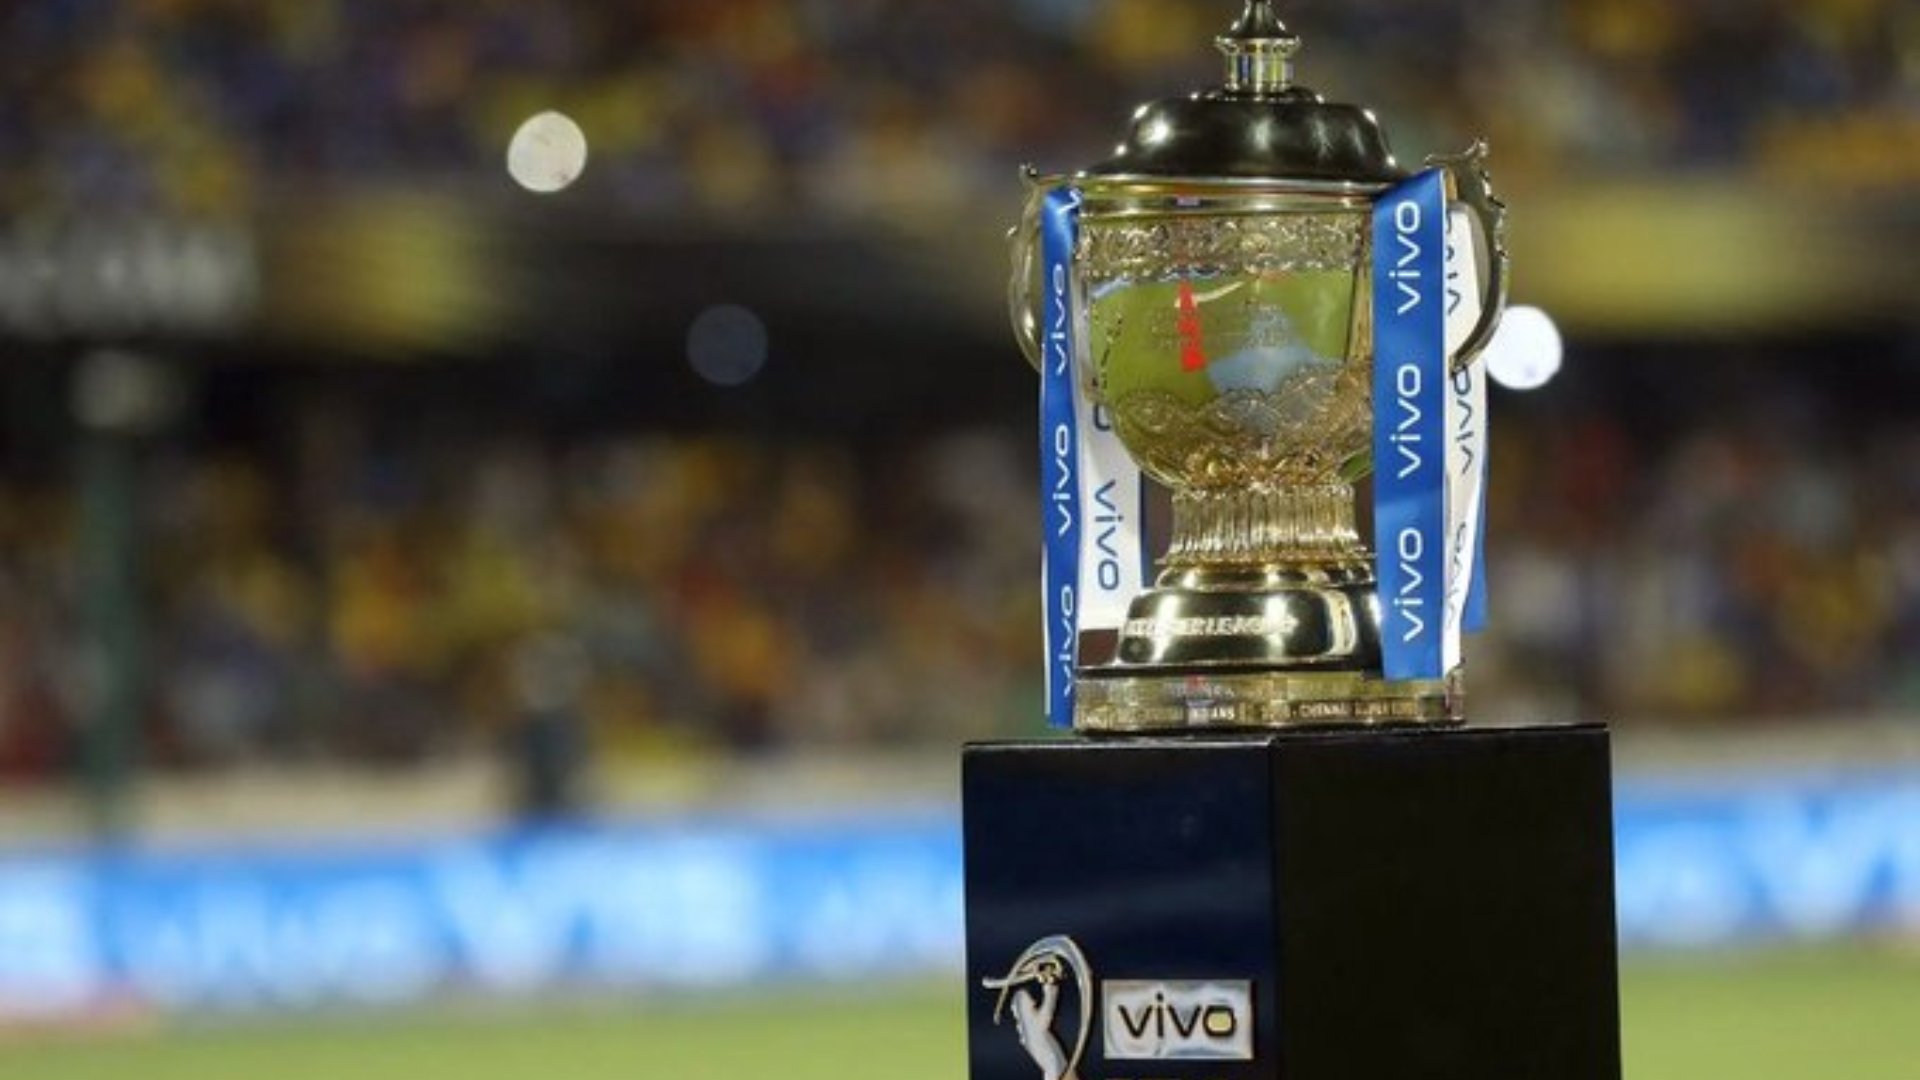 IPL 2021 has been suspended indefinitely after many players tested positive for the coronavirus.